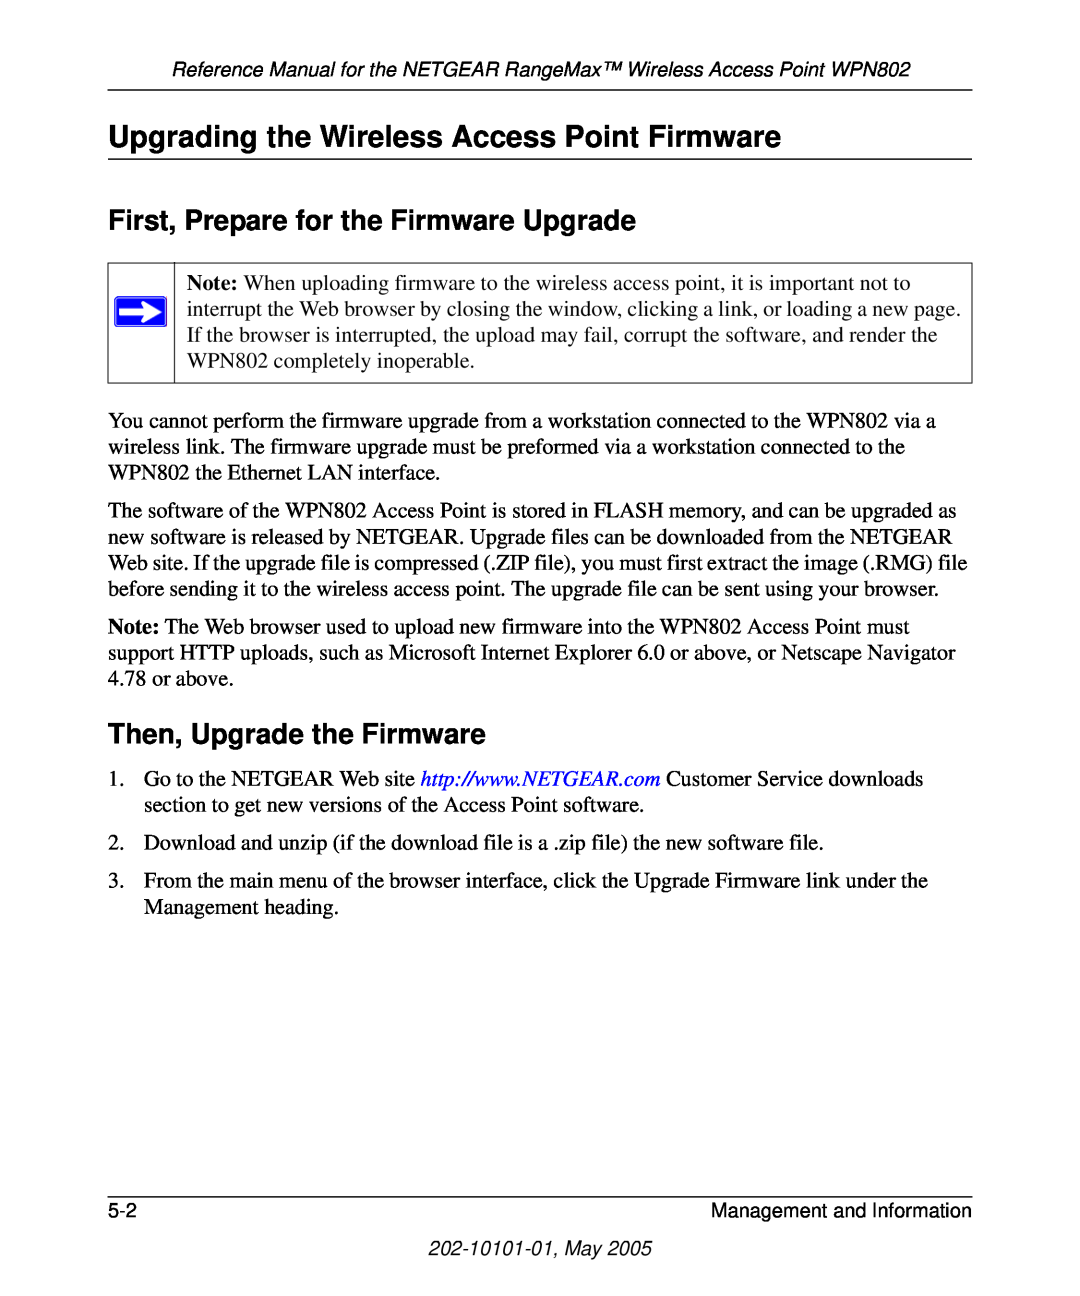 NETGEAR WPN802 manual Upgrading the Wireless Access Point Firmware, First, Prepare for the Firmware Upgrade 